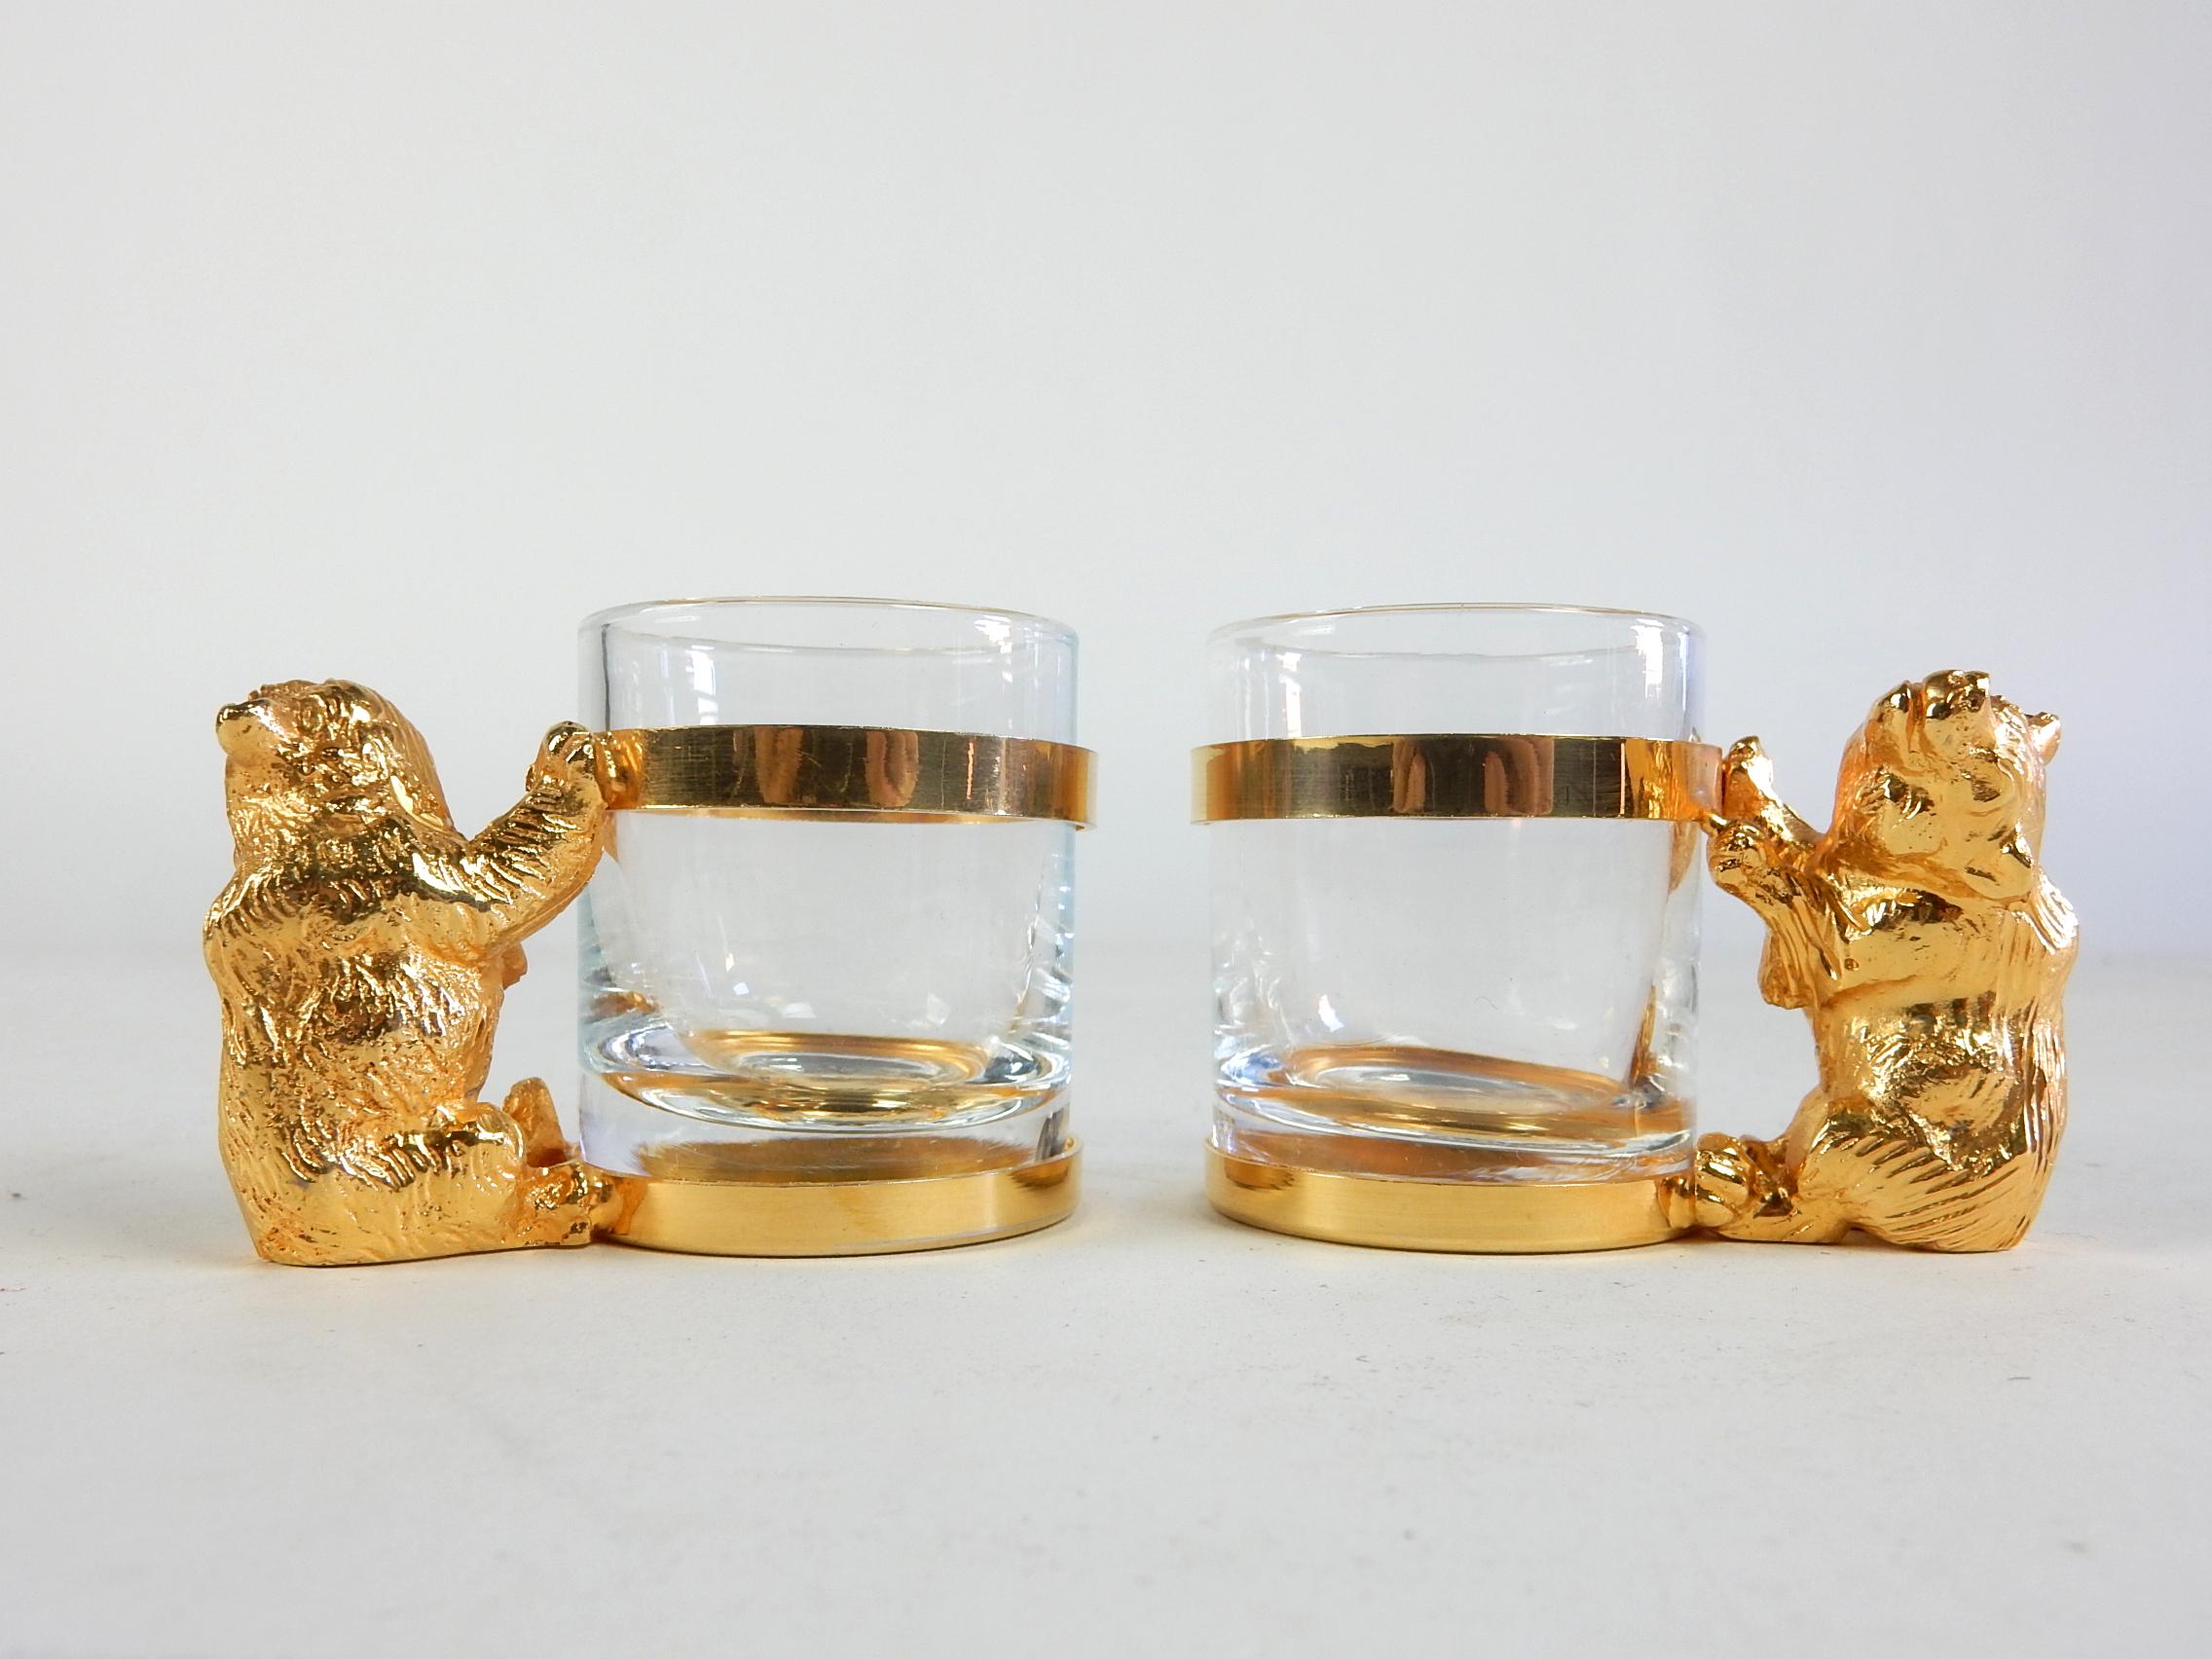 Rare set of 10 Italian Demitasse espresso cups by Mika.
Unique set for the espresso lover.
Gold color plated bear handles/frame with glass inserts.
Signed 